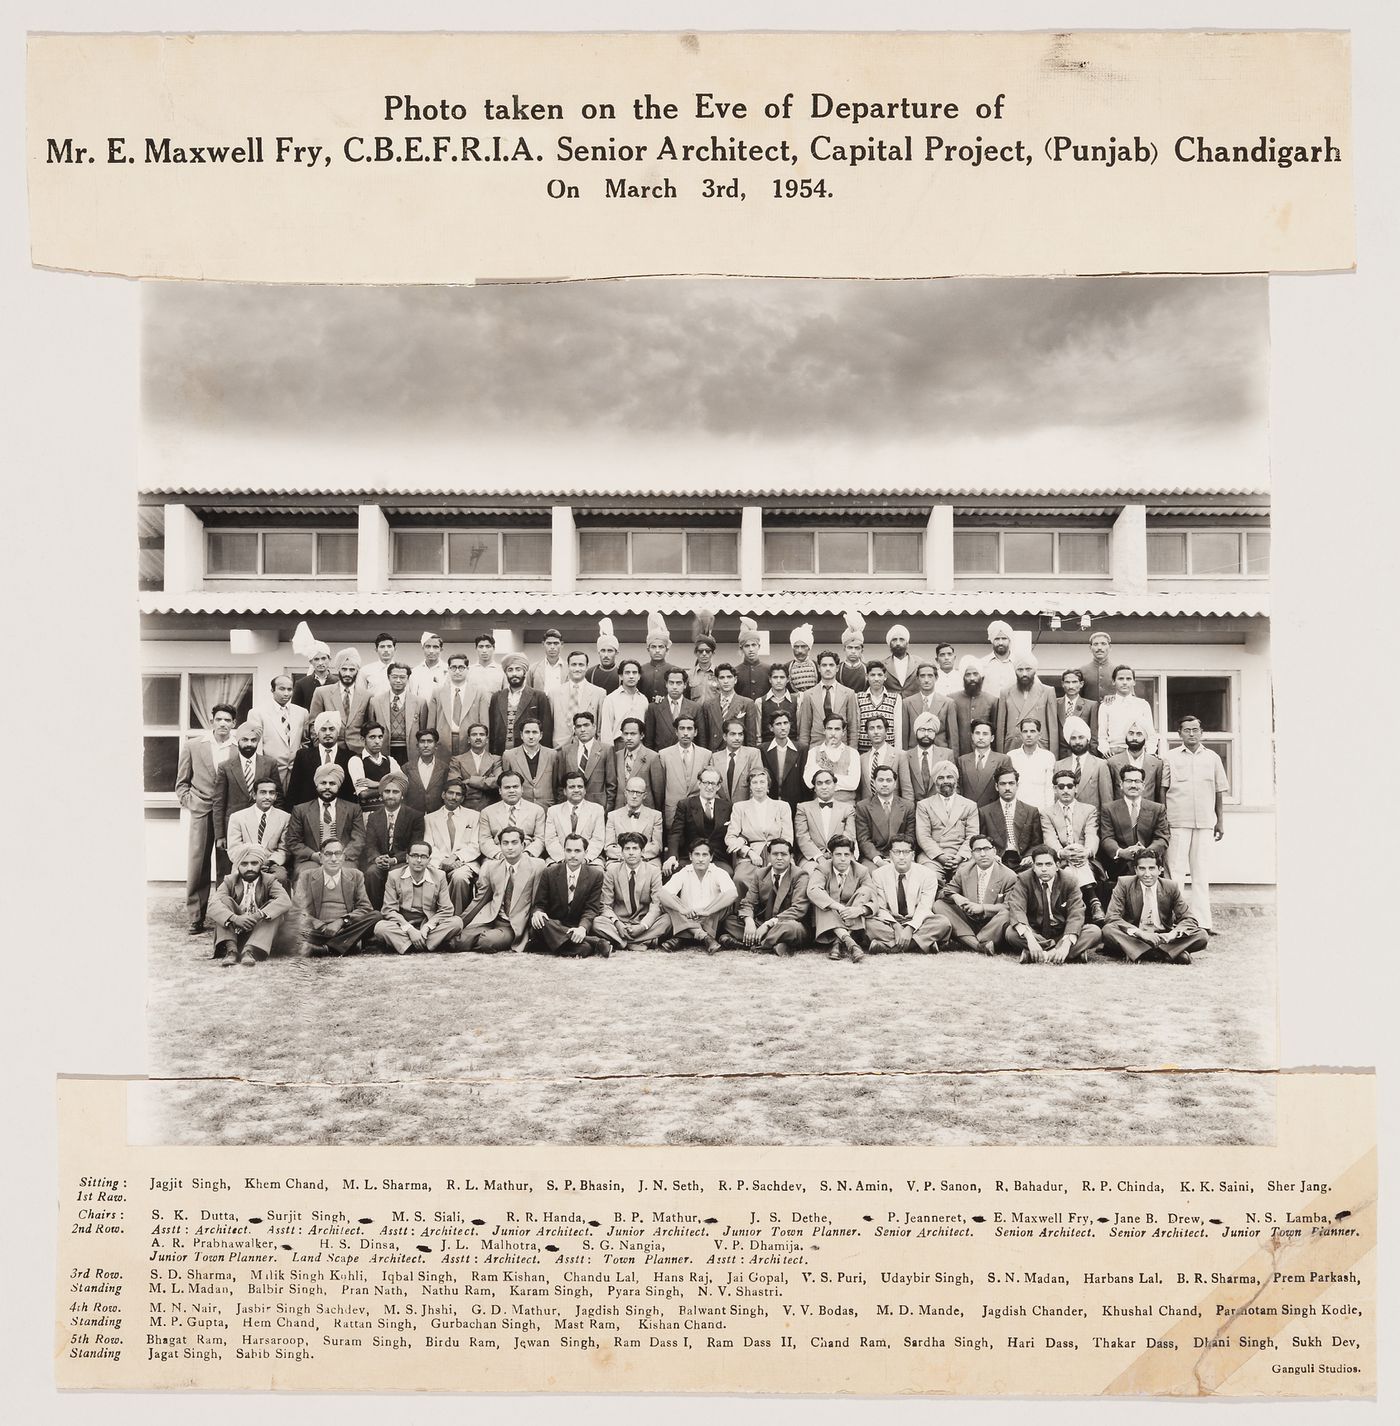 Photo taken on the eve of departure of Mr. E. Maxwell Fry, C.B.E.F.R.I.A. Senior Architect, Capital Project, (Punjab) Chandigarh on March 3rd, 1954